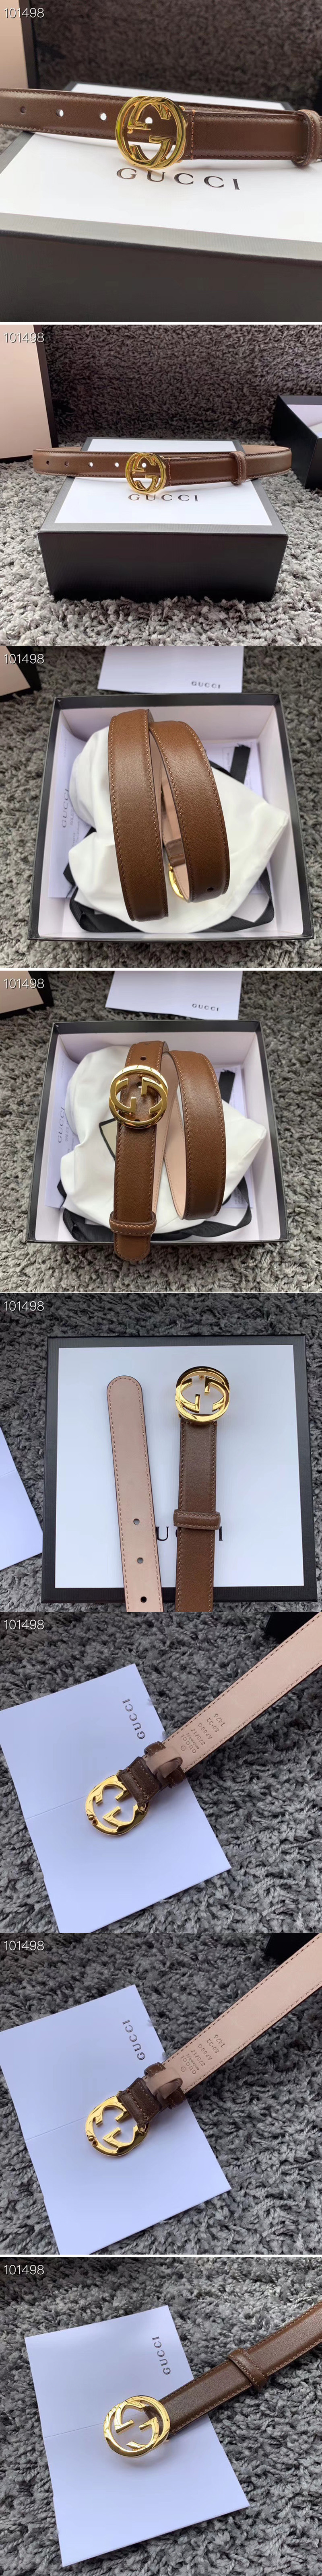 Replica Women's Gucci 370717 25mm Leather belt with Interlocking Gold G buckle in Caramel Leather